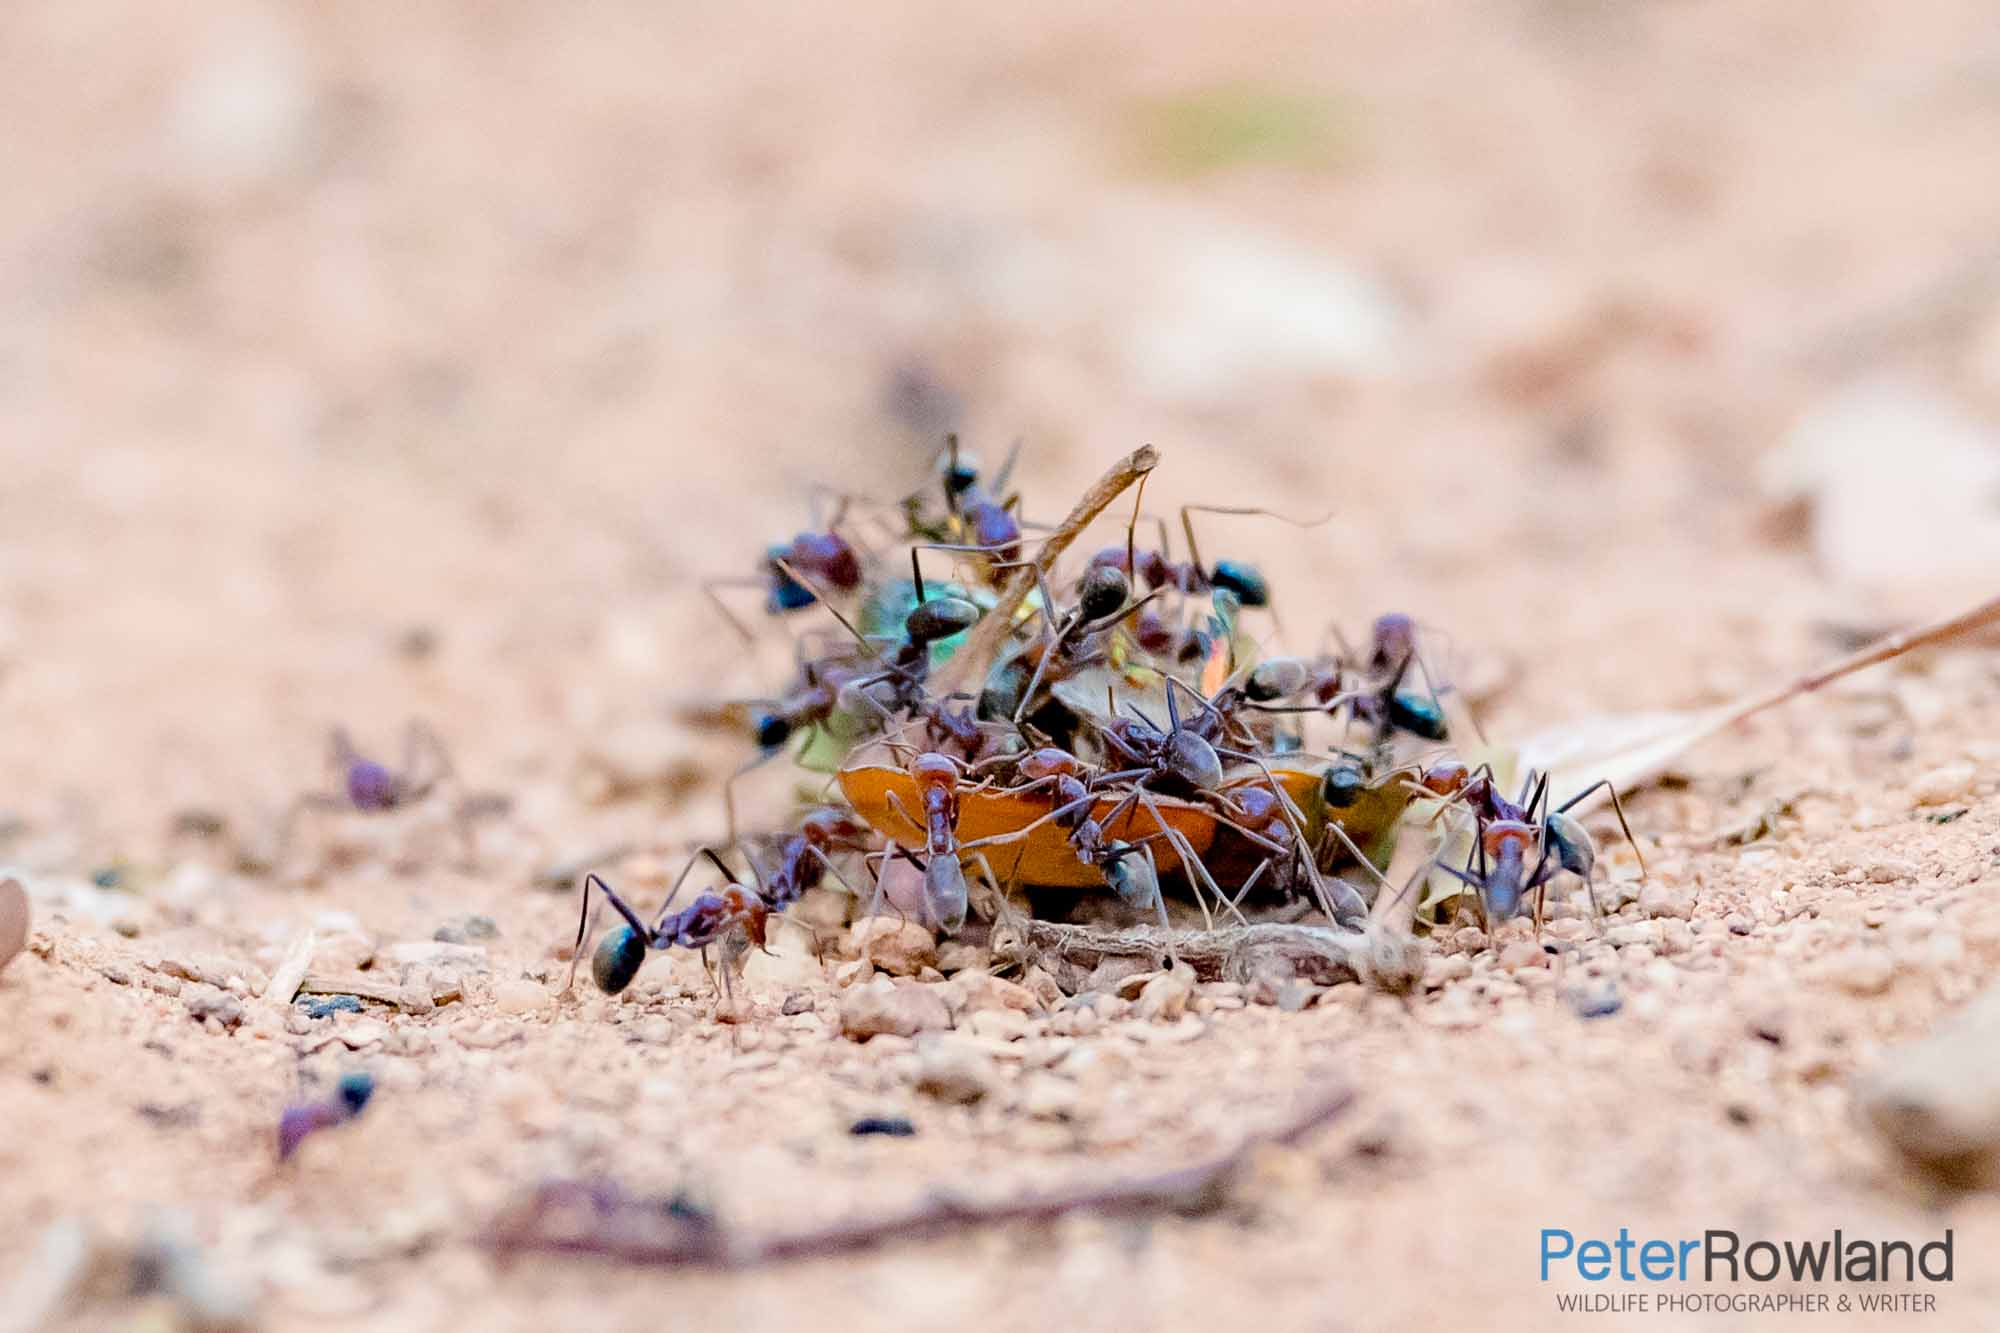 Meat Ants attacking a scarab beetle. [Photographed by Peter Rowland]